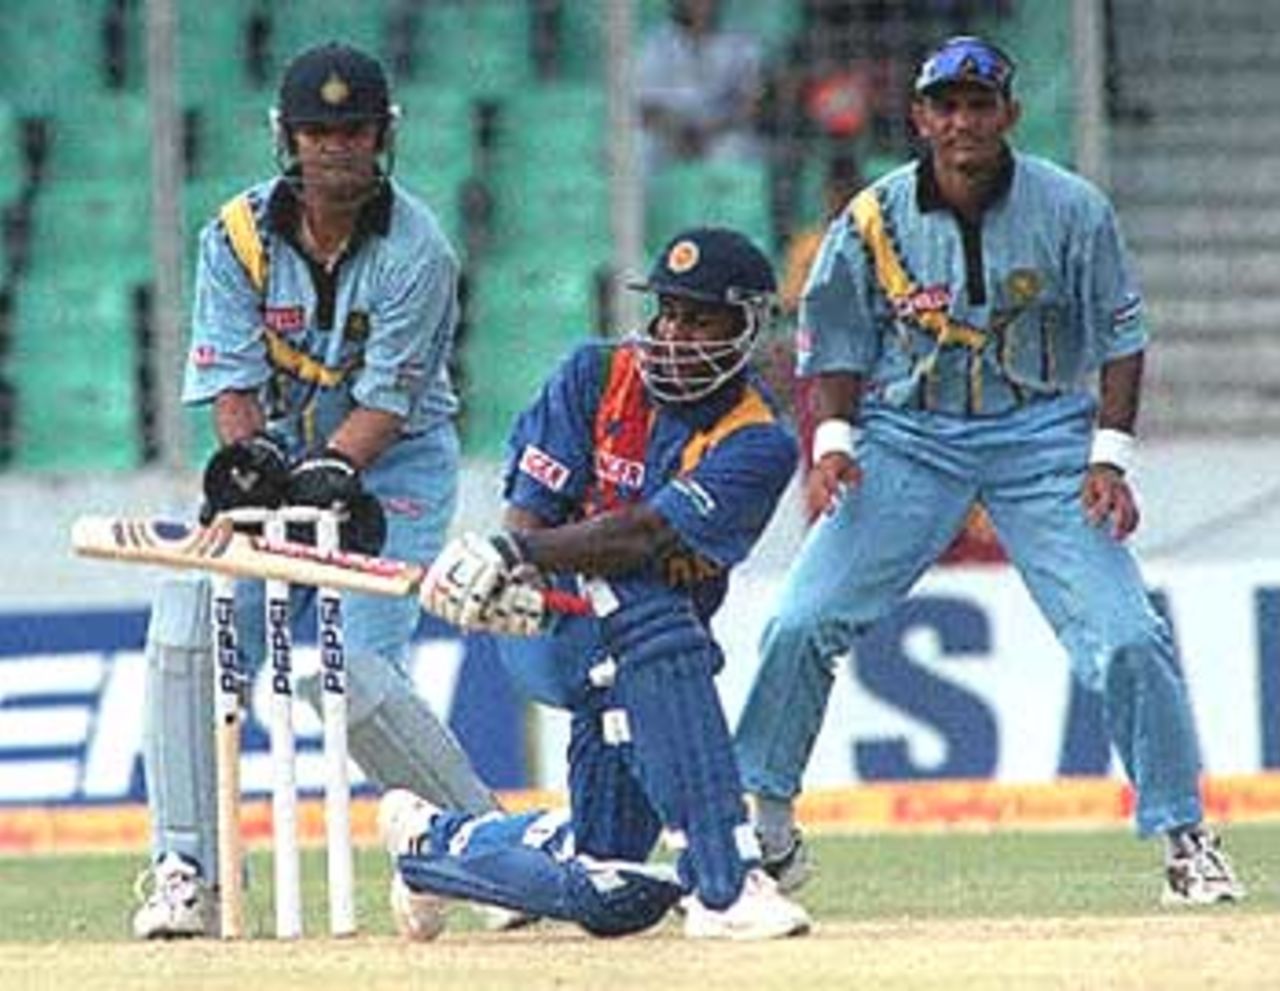 Indian wicketkeeper Rahul Dravid (L) and former captain Mohammad Azharuddin (R) watch Sri Lankan skipper Sanath Jayasuriya (C) batting during his knock of 105 of 116 balls against India in the four-nation Asia Cup limited-overs tournament at the Bangabandhu national stadium in Dhaka. India restricted Sri Lanka 276-8. Asia Cup, 1999/00, 3rd Match, India v Sri Lanka, Bangabandhu National Stadium, Dhaka. 1 June 2000.